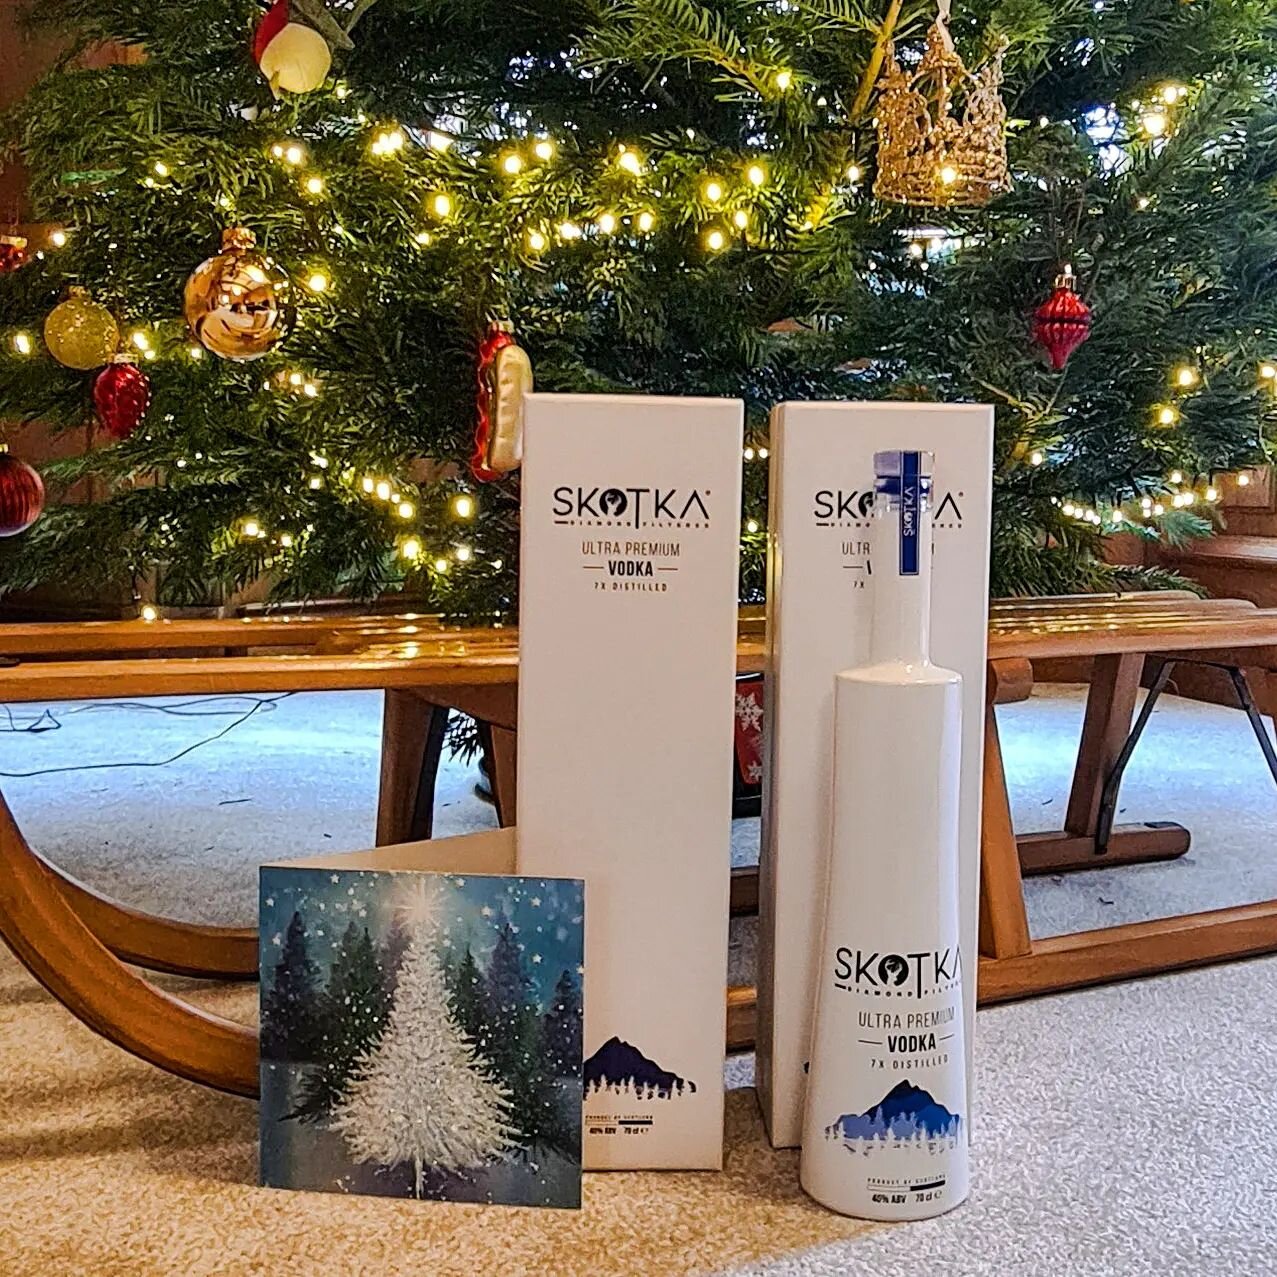 Know a vodka fan? Then get them something a bit different this year. An international Award Winning Scottish Vodka! We can even sort out the Christmas card for you 🥰

Last day for Christmas gifts 23rd (choose DPD Next Day).

Cheers 🍸

.
#vodkagram 